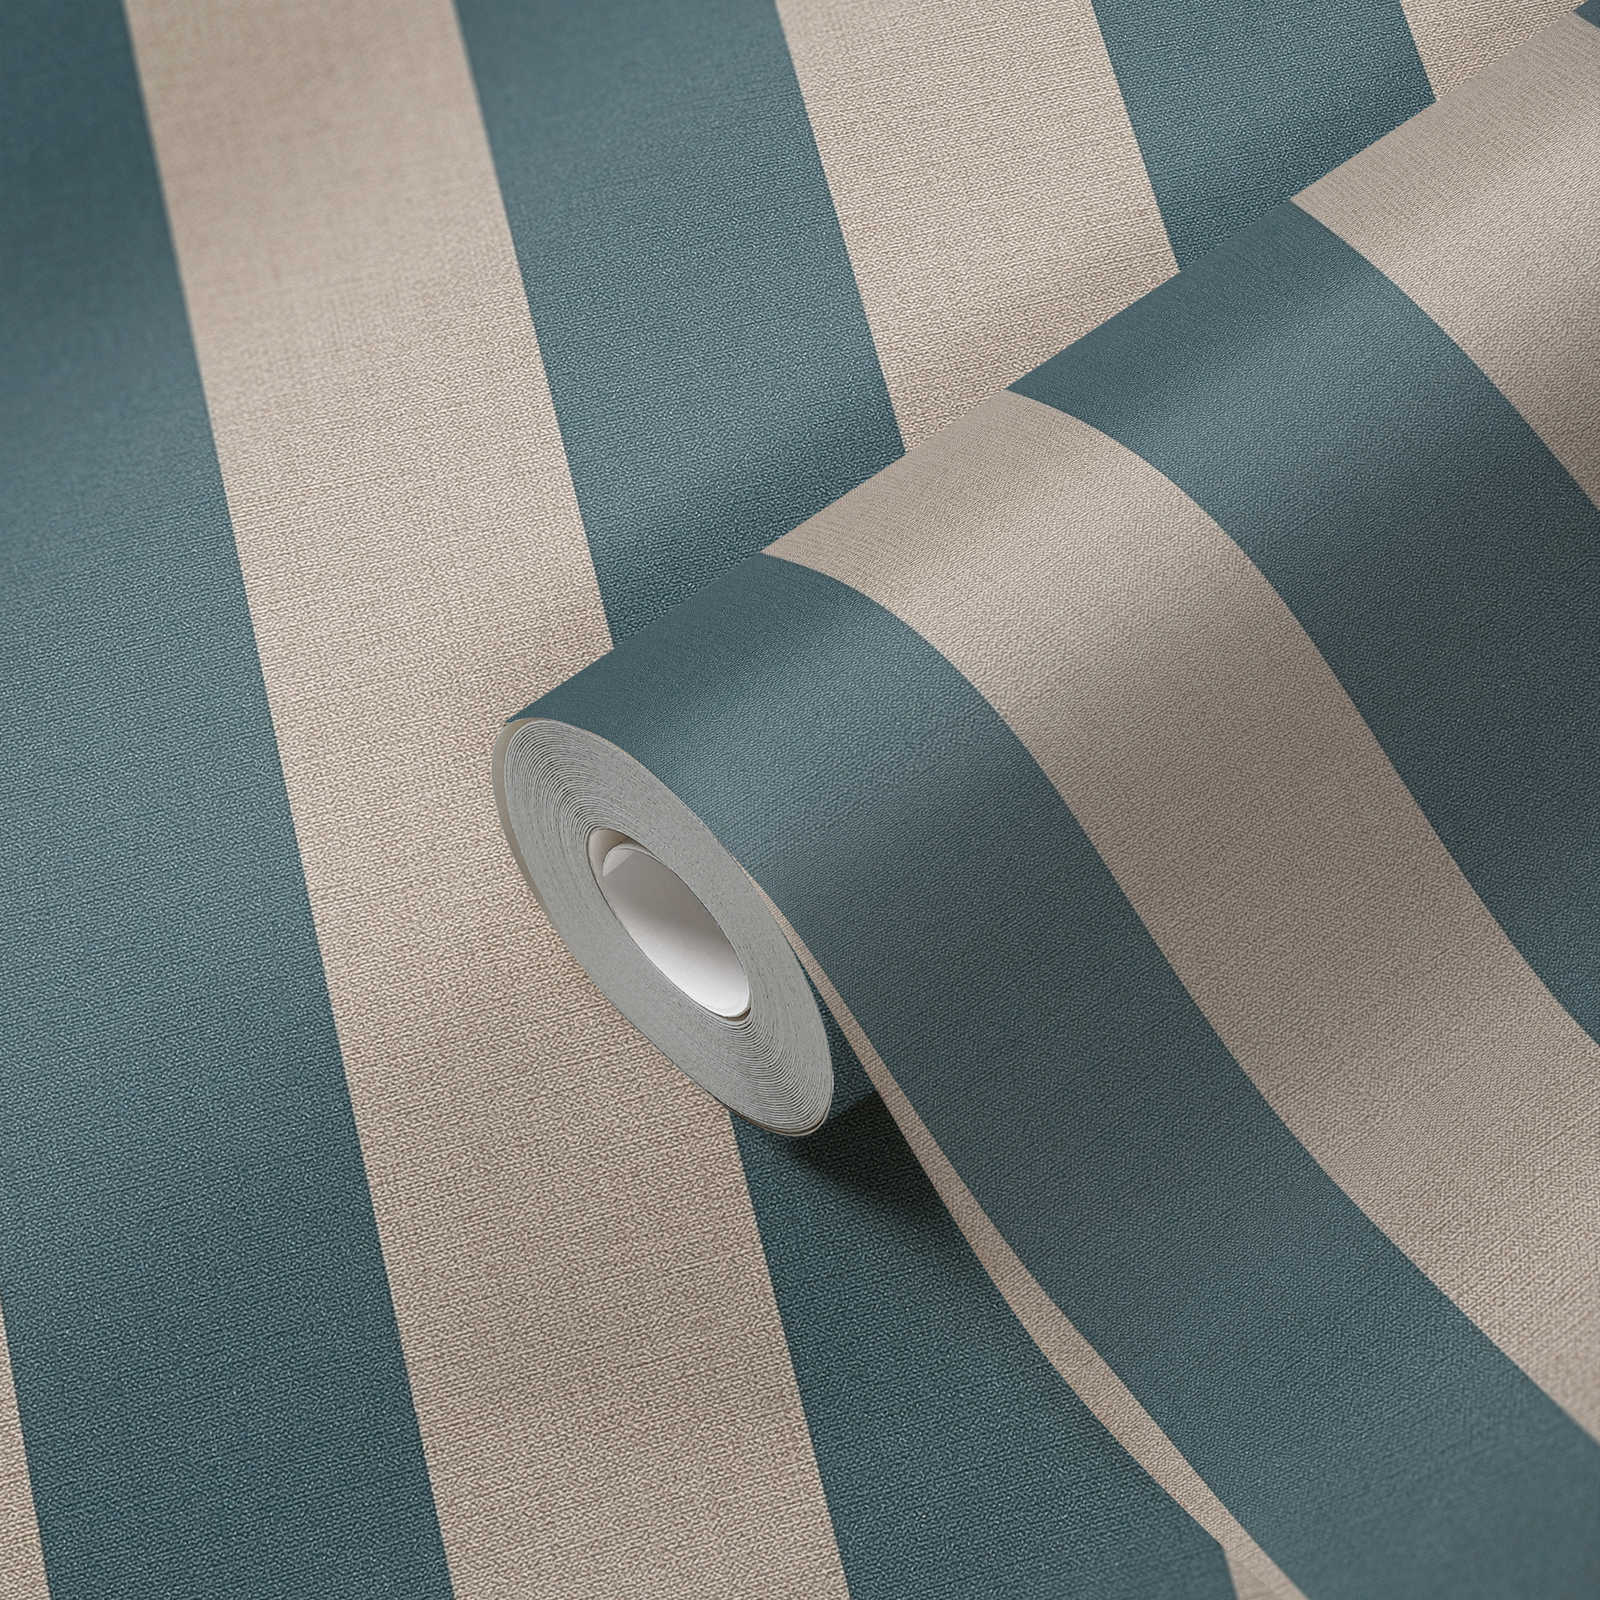             Striped wallpaper with linen look PVC-free - blue, brown
        